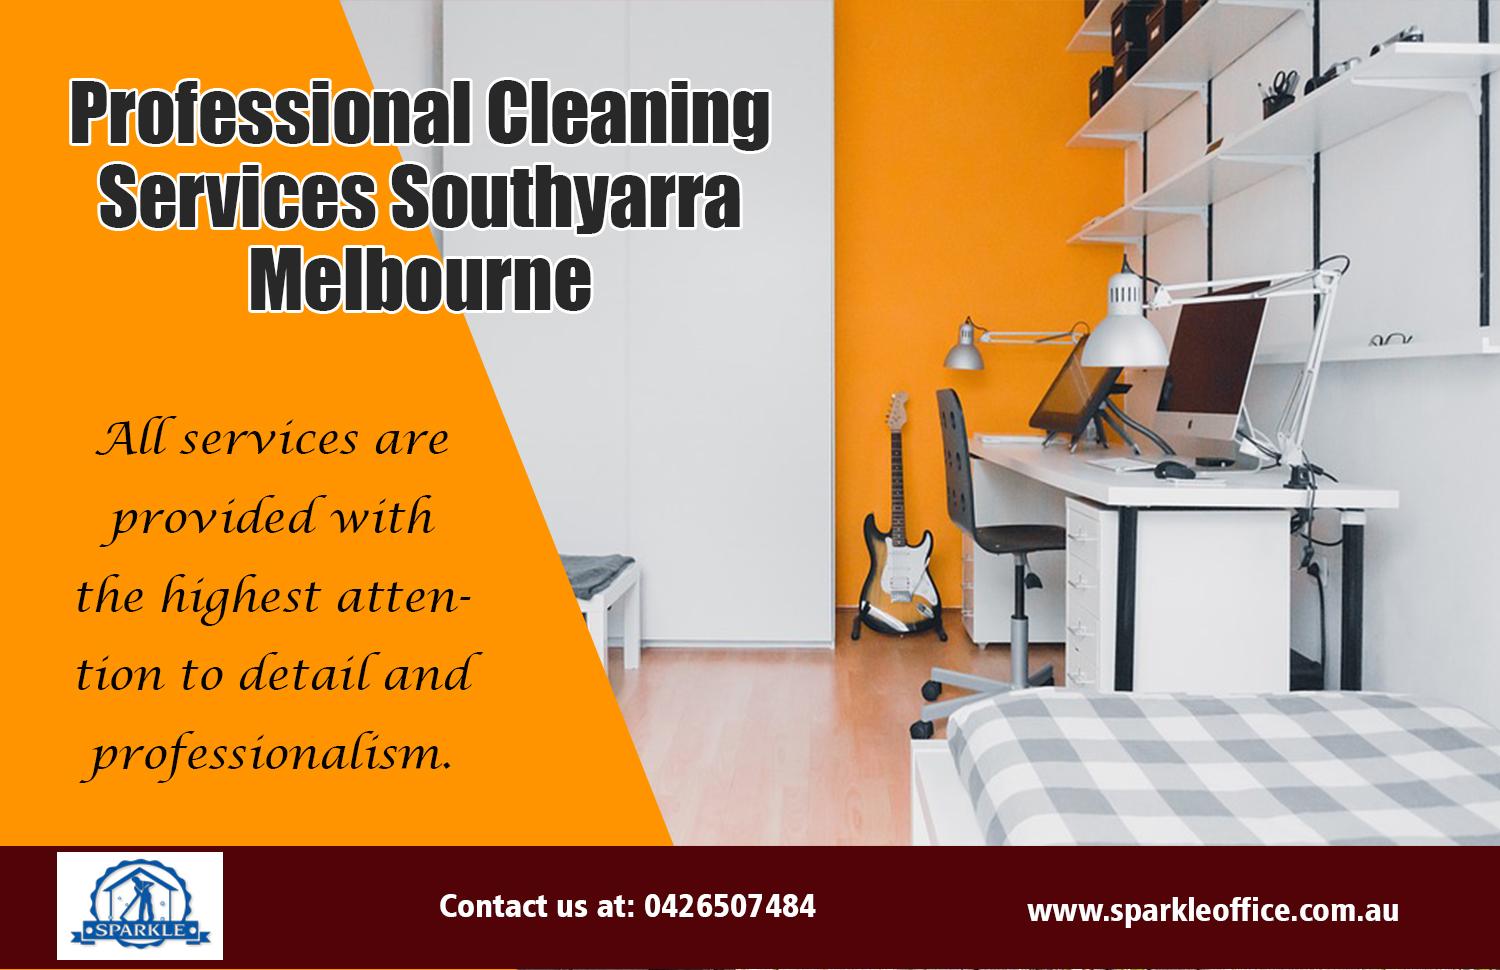 Professional Cleaning Services southyarra Melbourne